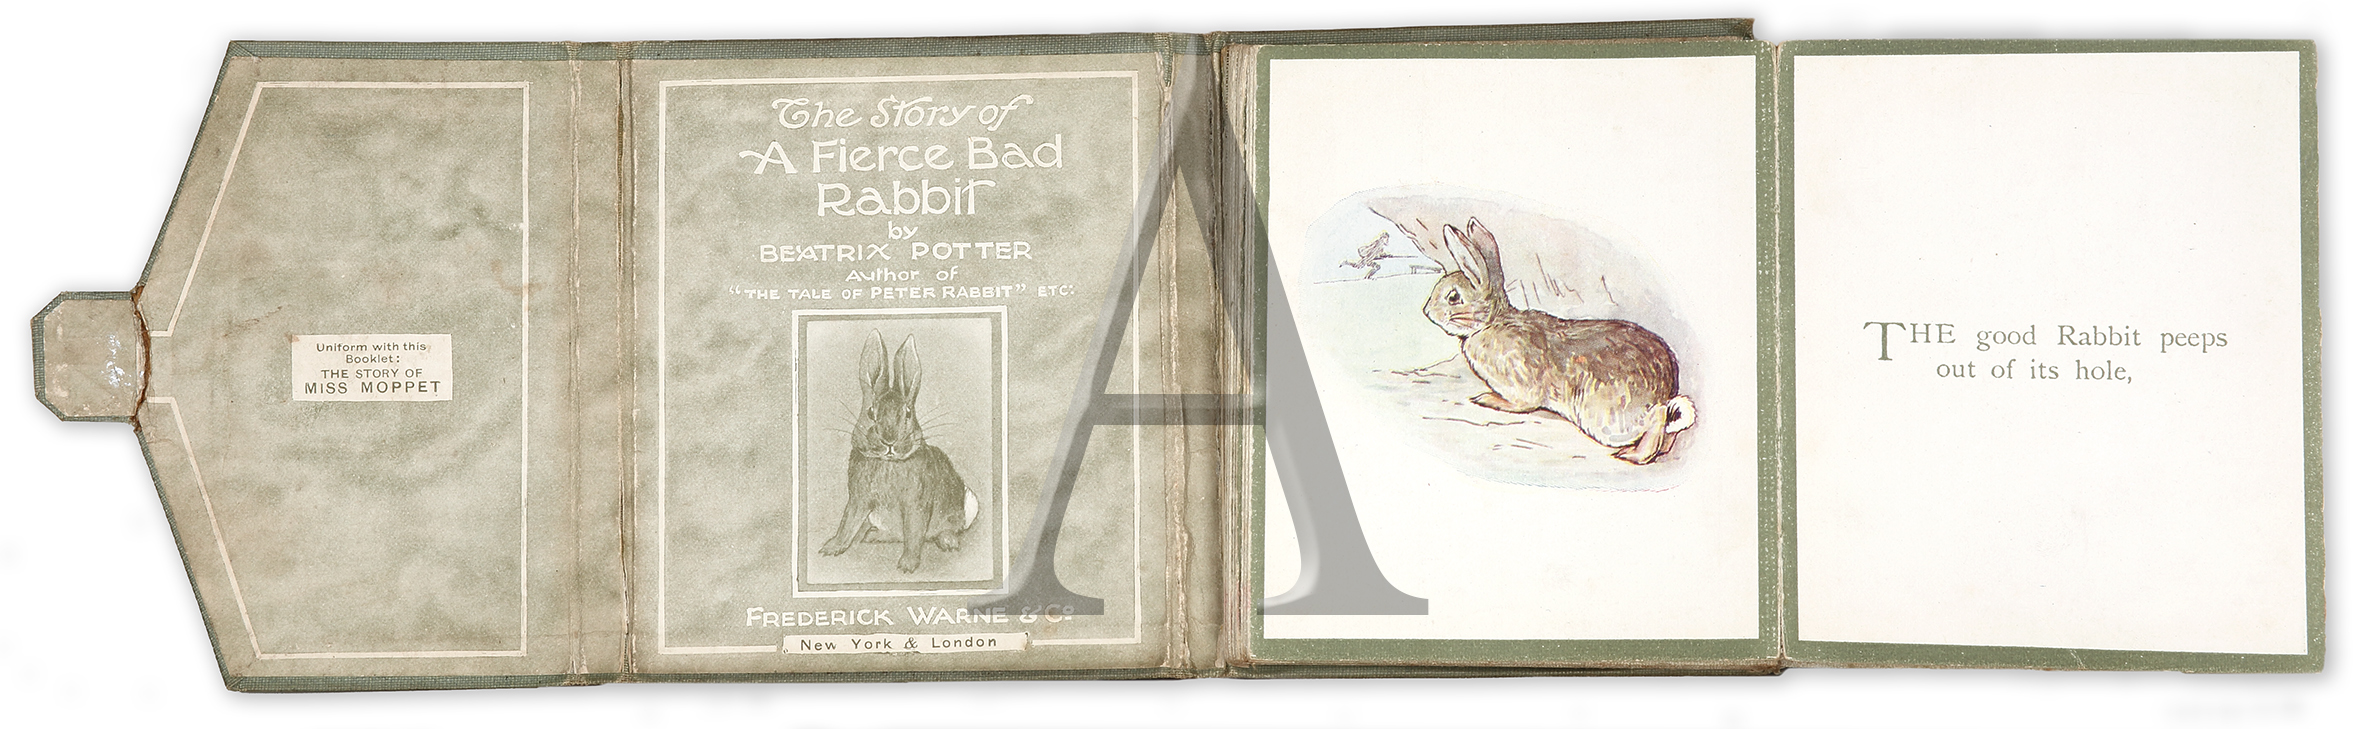 the-story-of-a-fierce-bad-rabbit-30230 - Antique Print from 1906